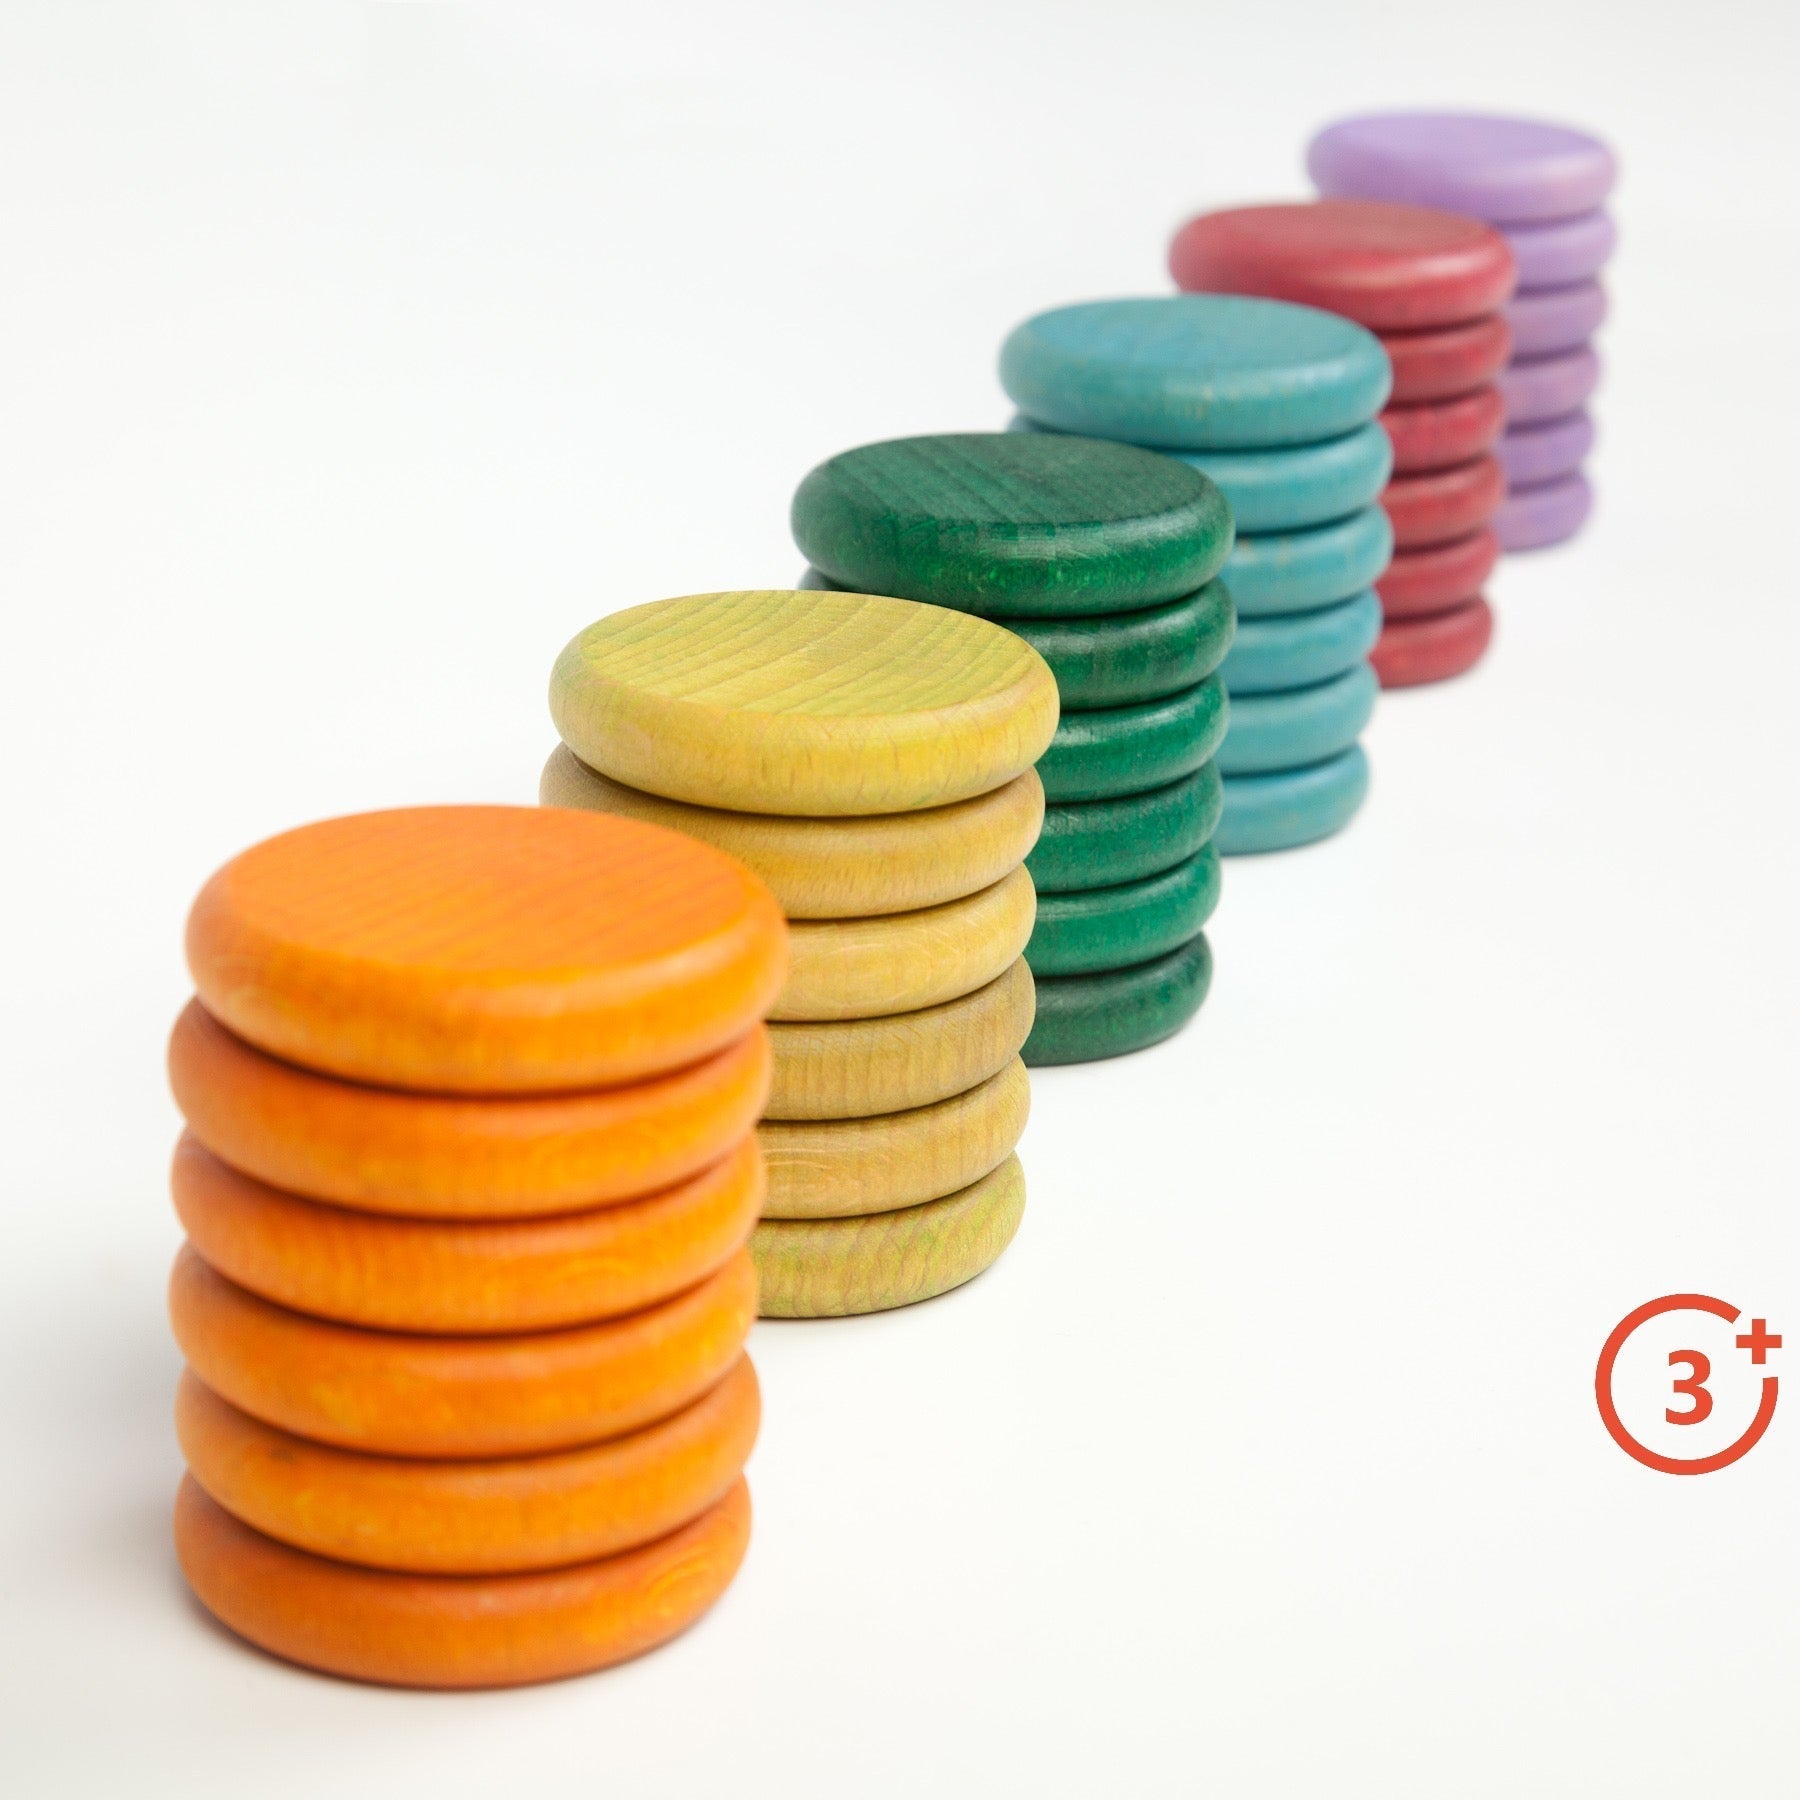 Grapat Coloured Coins - 36 pieces in 6 Non-Basic Colours-Grapat-Modern Rascals